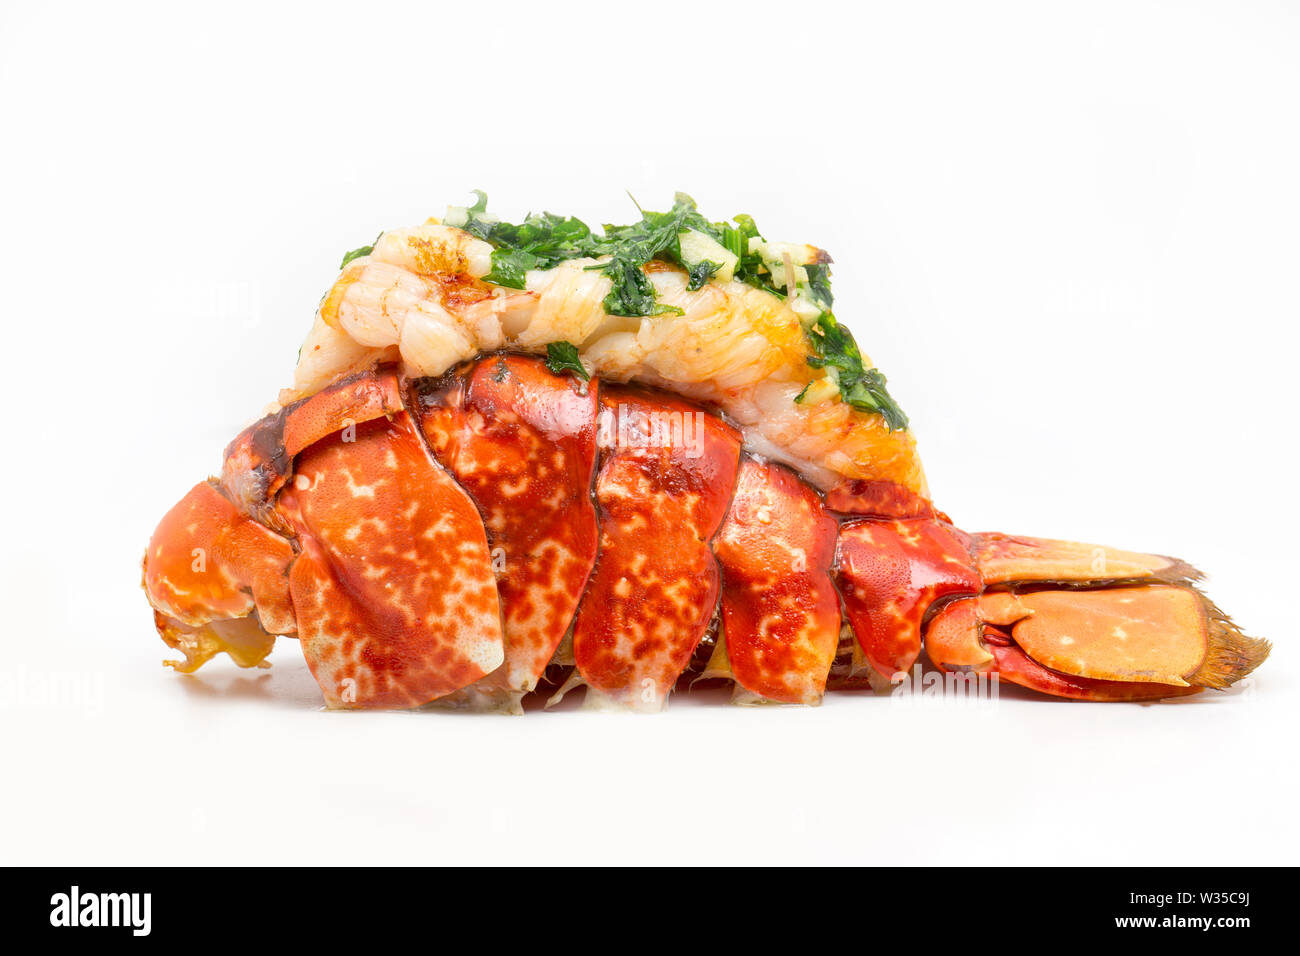 A cooked lobster tail from a lobster, Homarus gammarus caught in a lobster pot in the English Channel. It has been split, grilled and butter, garlic a Stock Photo